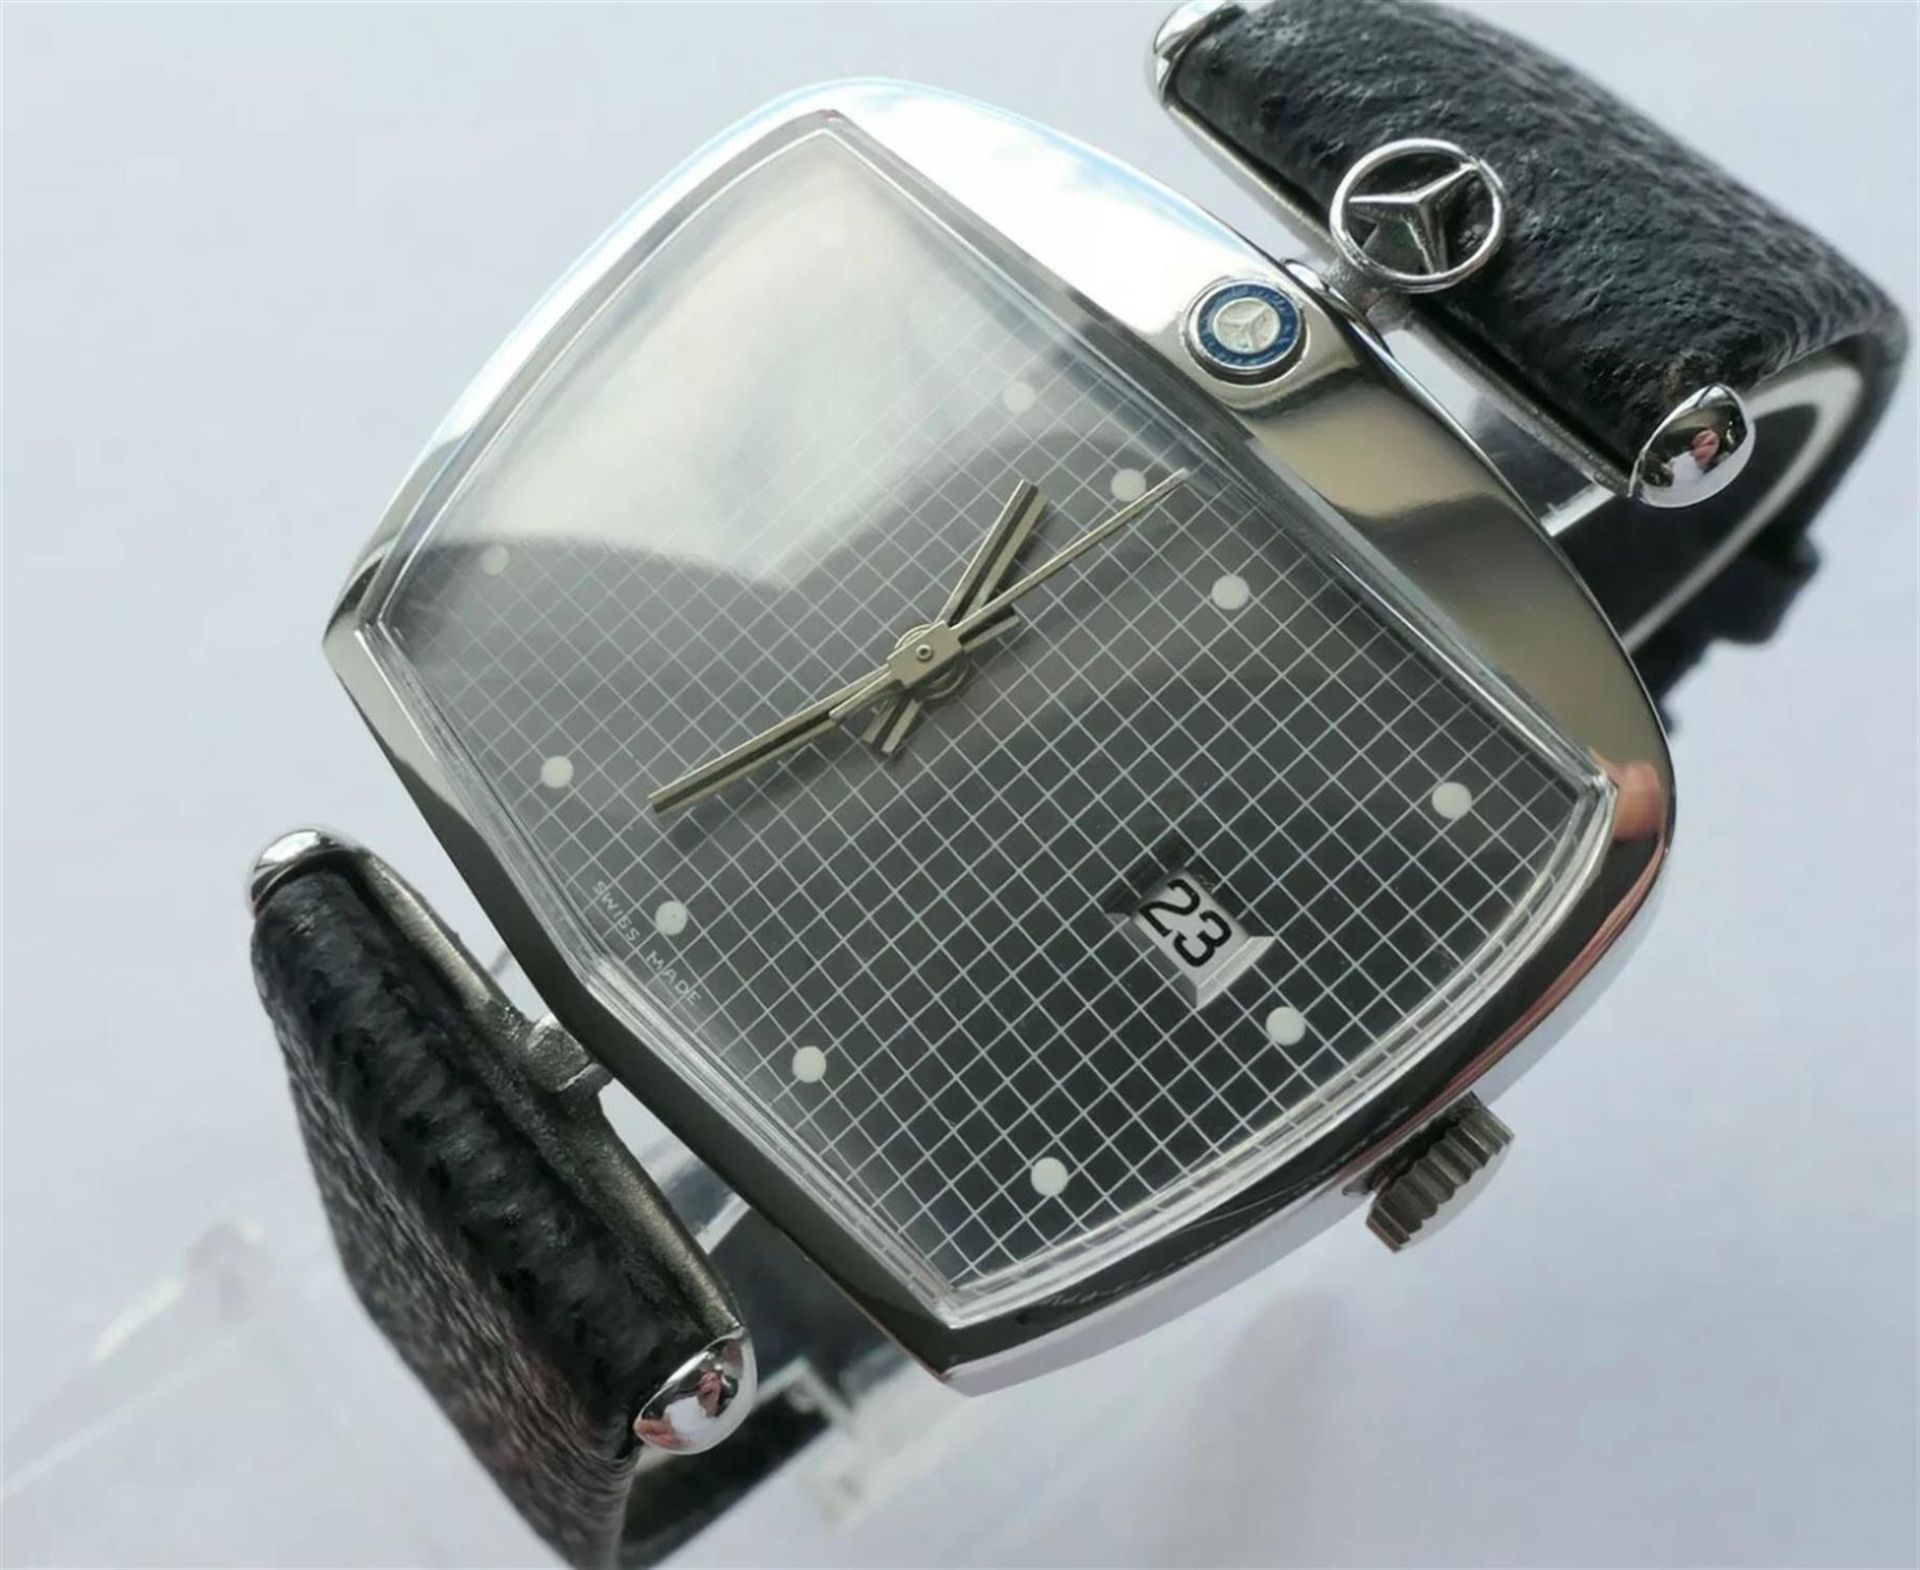 A Rare Mercedes-Benz 'Grille-Head' New Old Stock Wristwatch Evocative of the Famous German Marque - Image 5 of 10